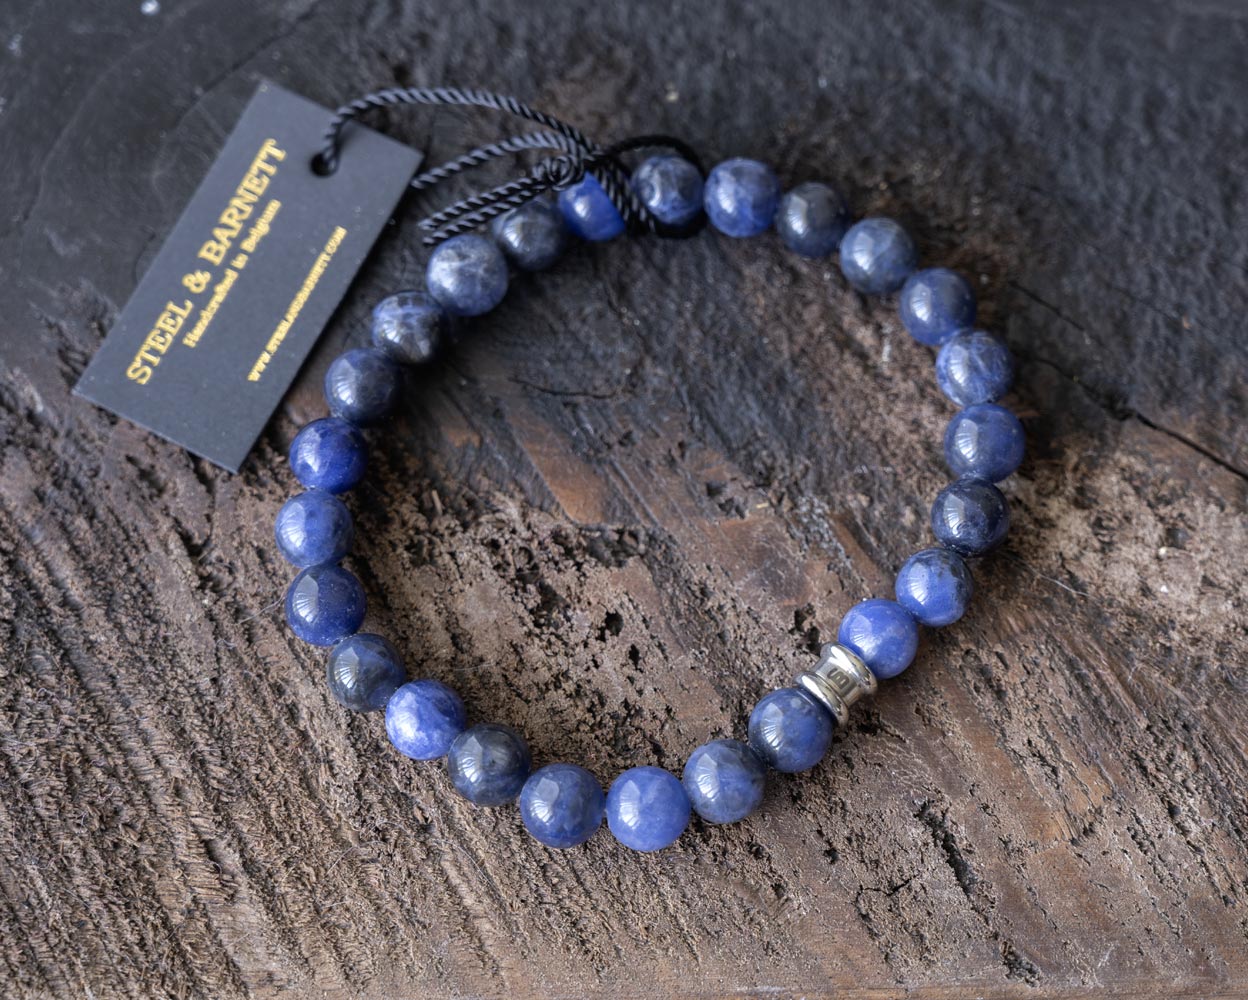 Top View of the Steel and Barnett Navy Stones and Beads Bracelet